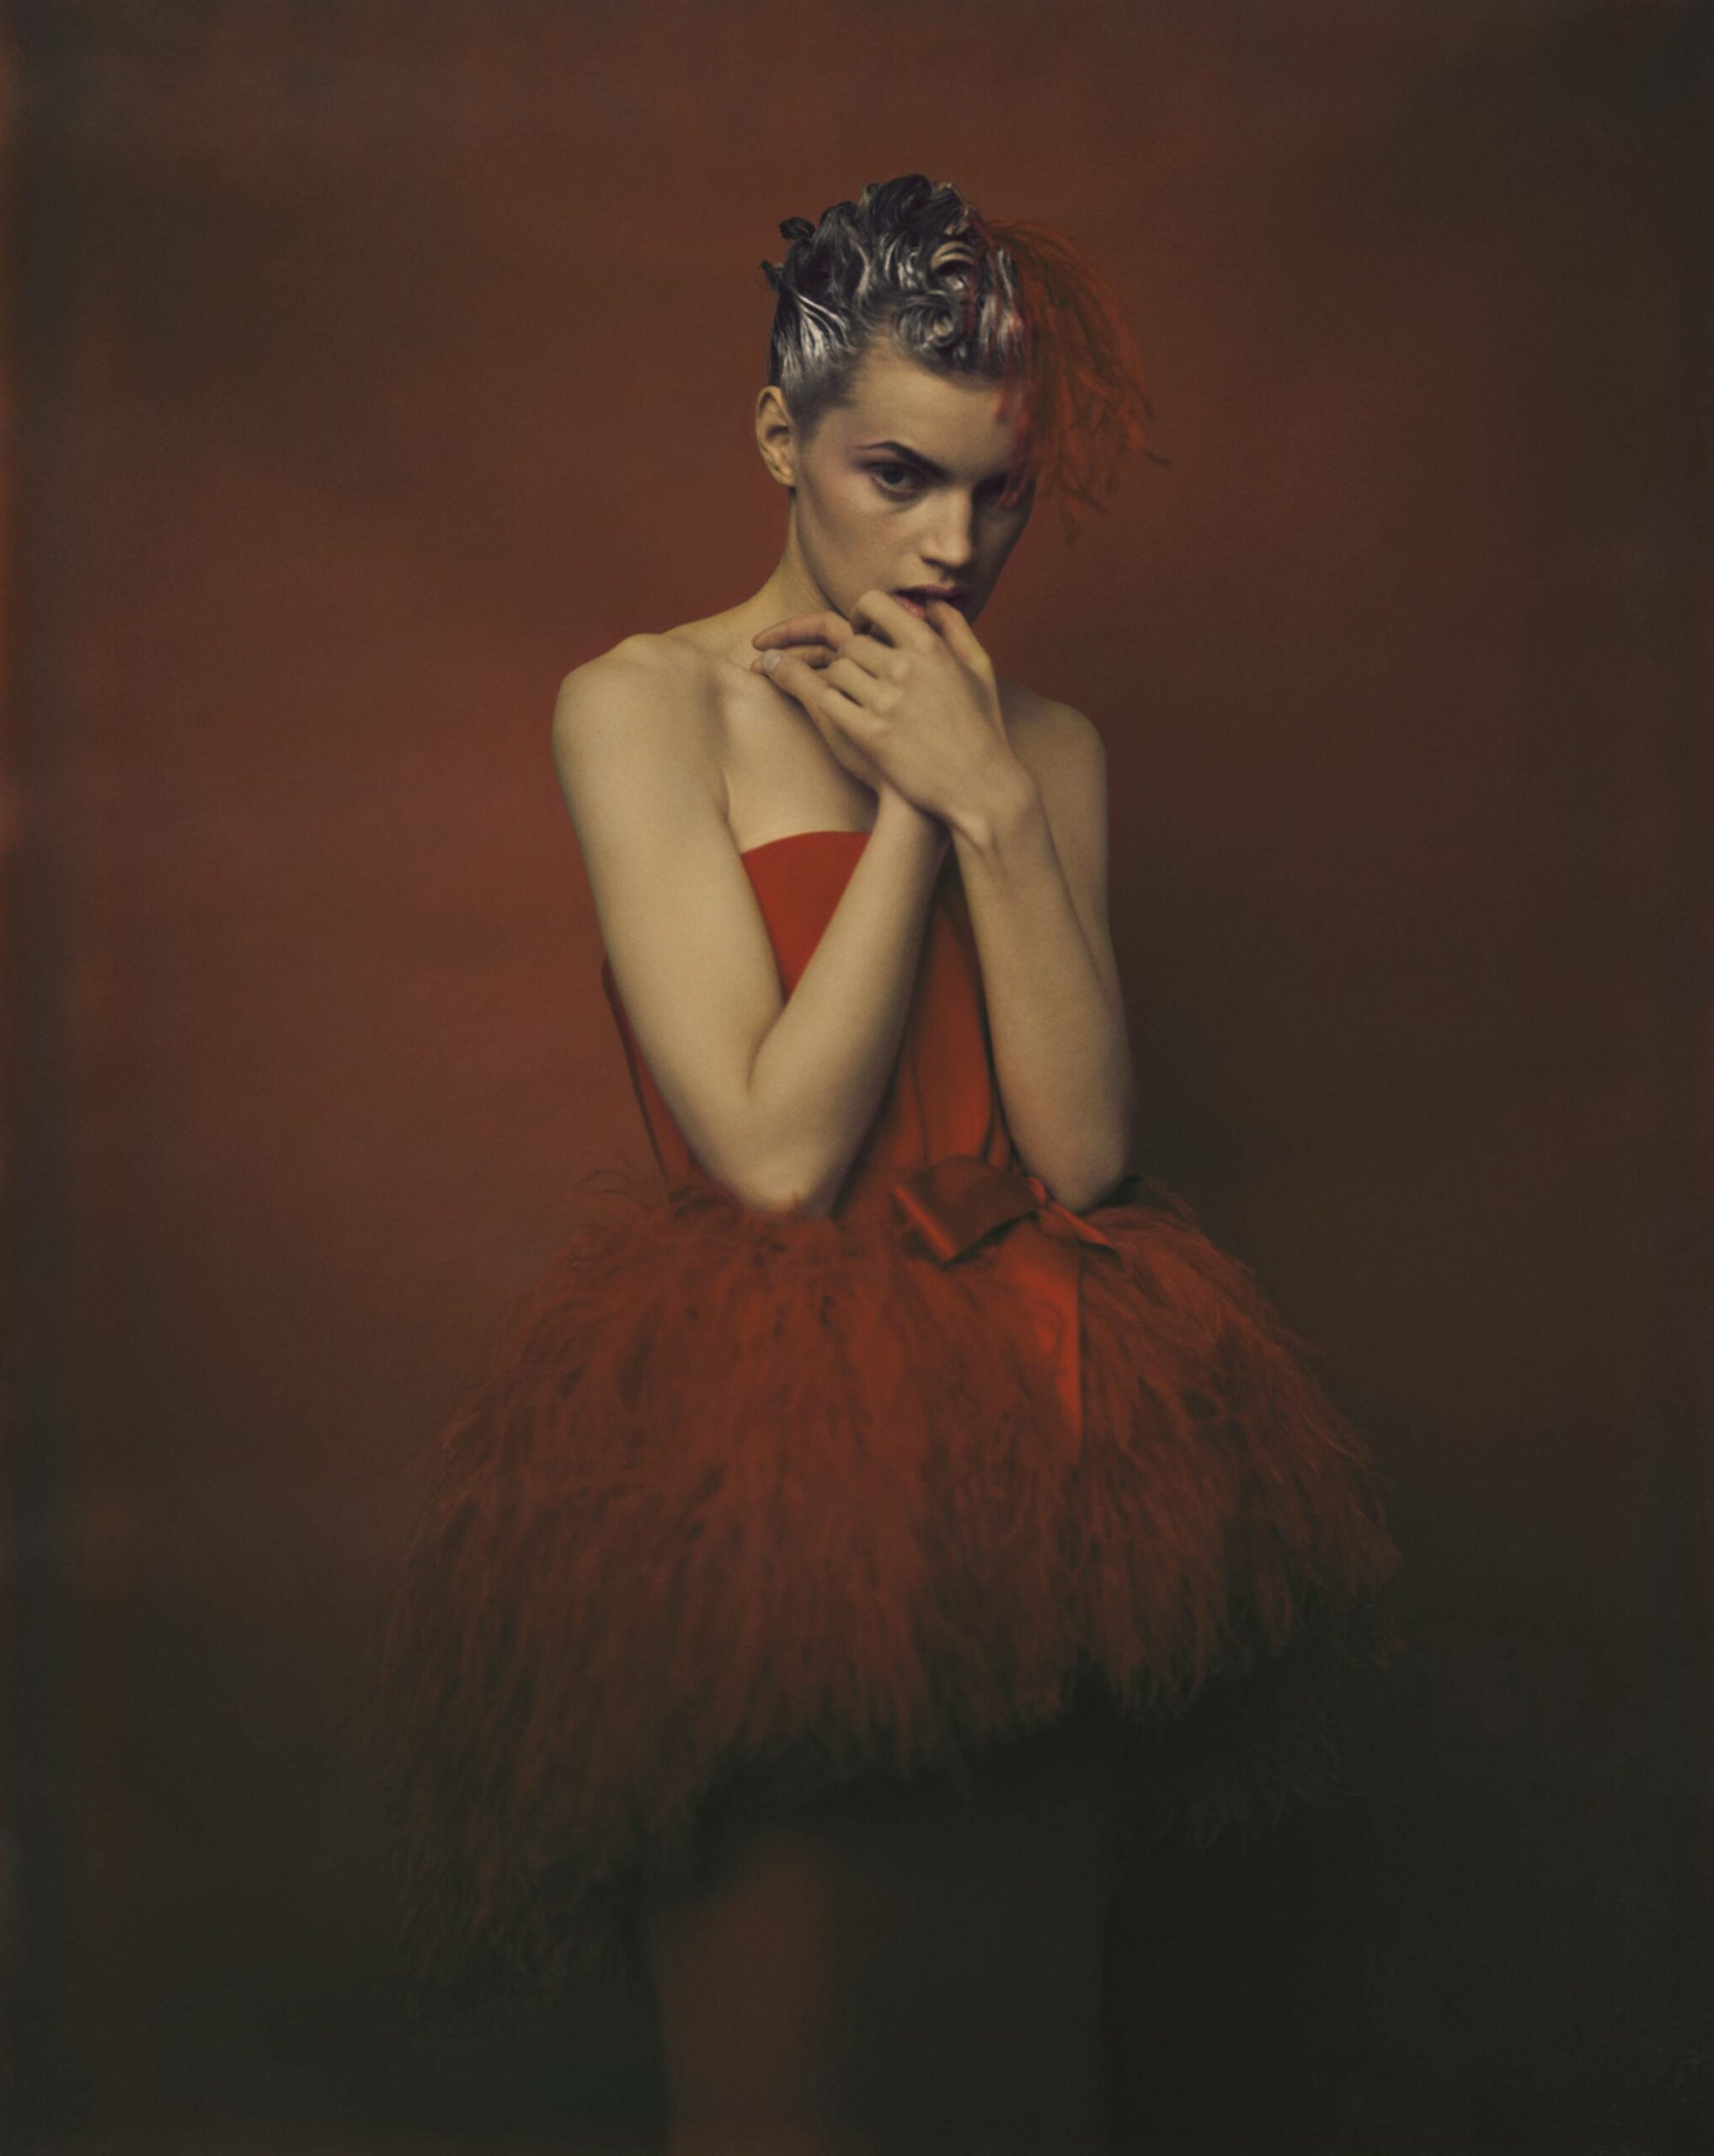 INDIA, an exhibition by Paolo Roversi